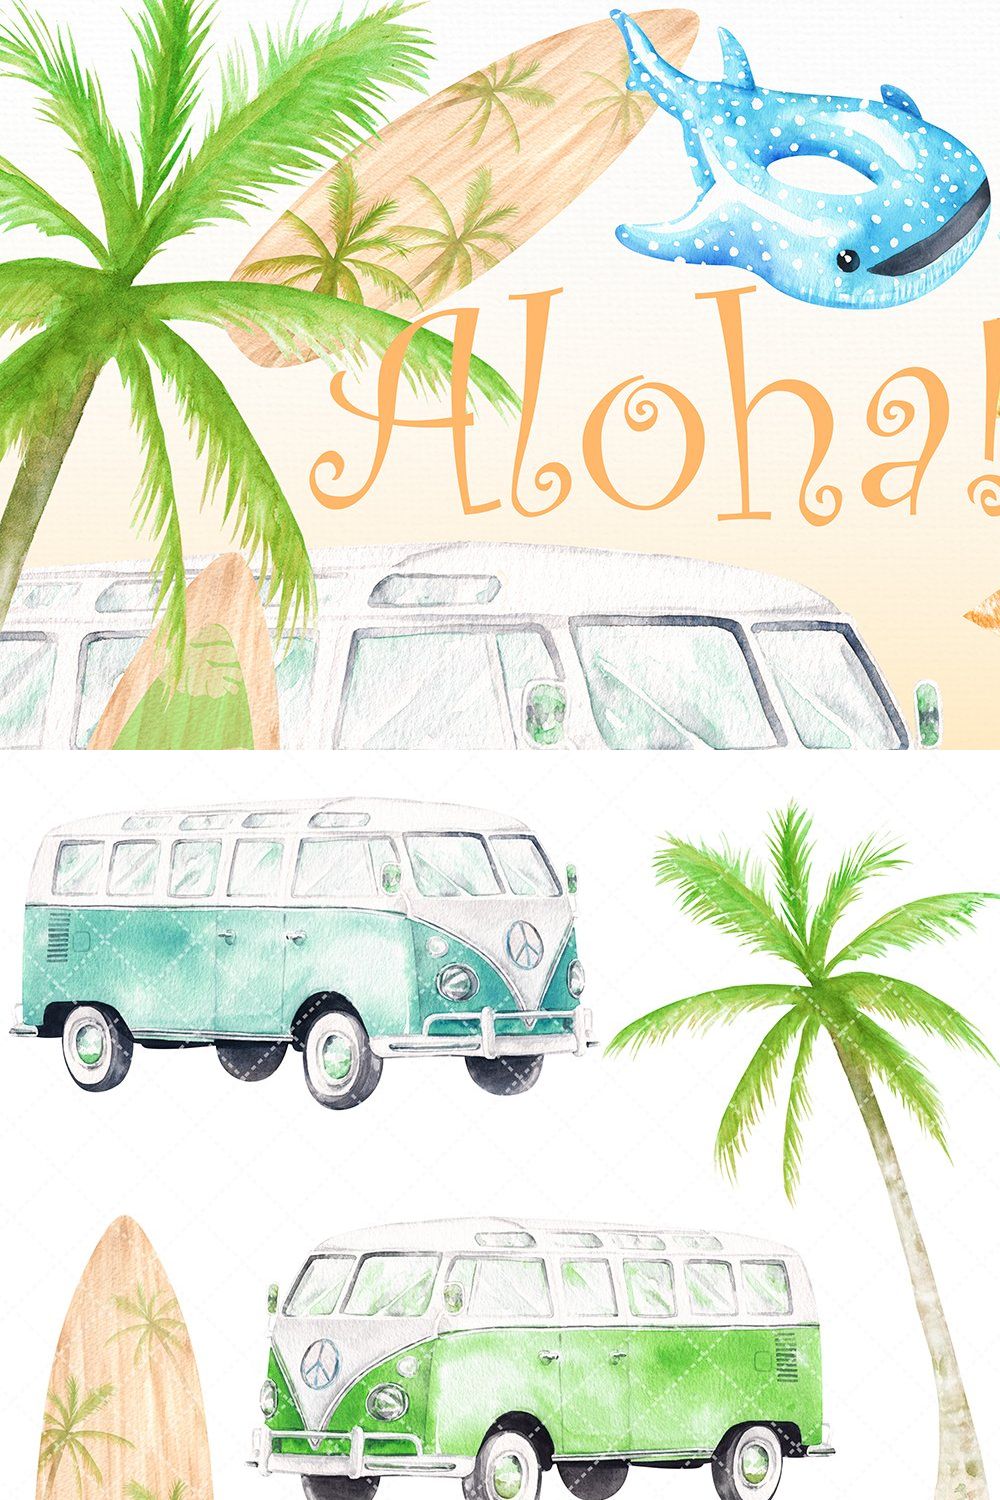 Camper van and surf boards cliparts pinterest preview image.